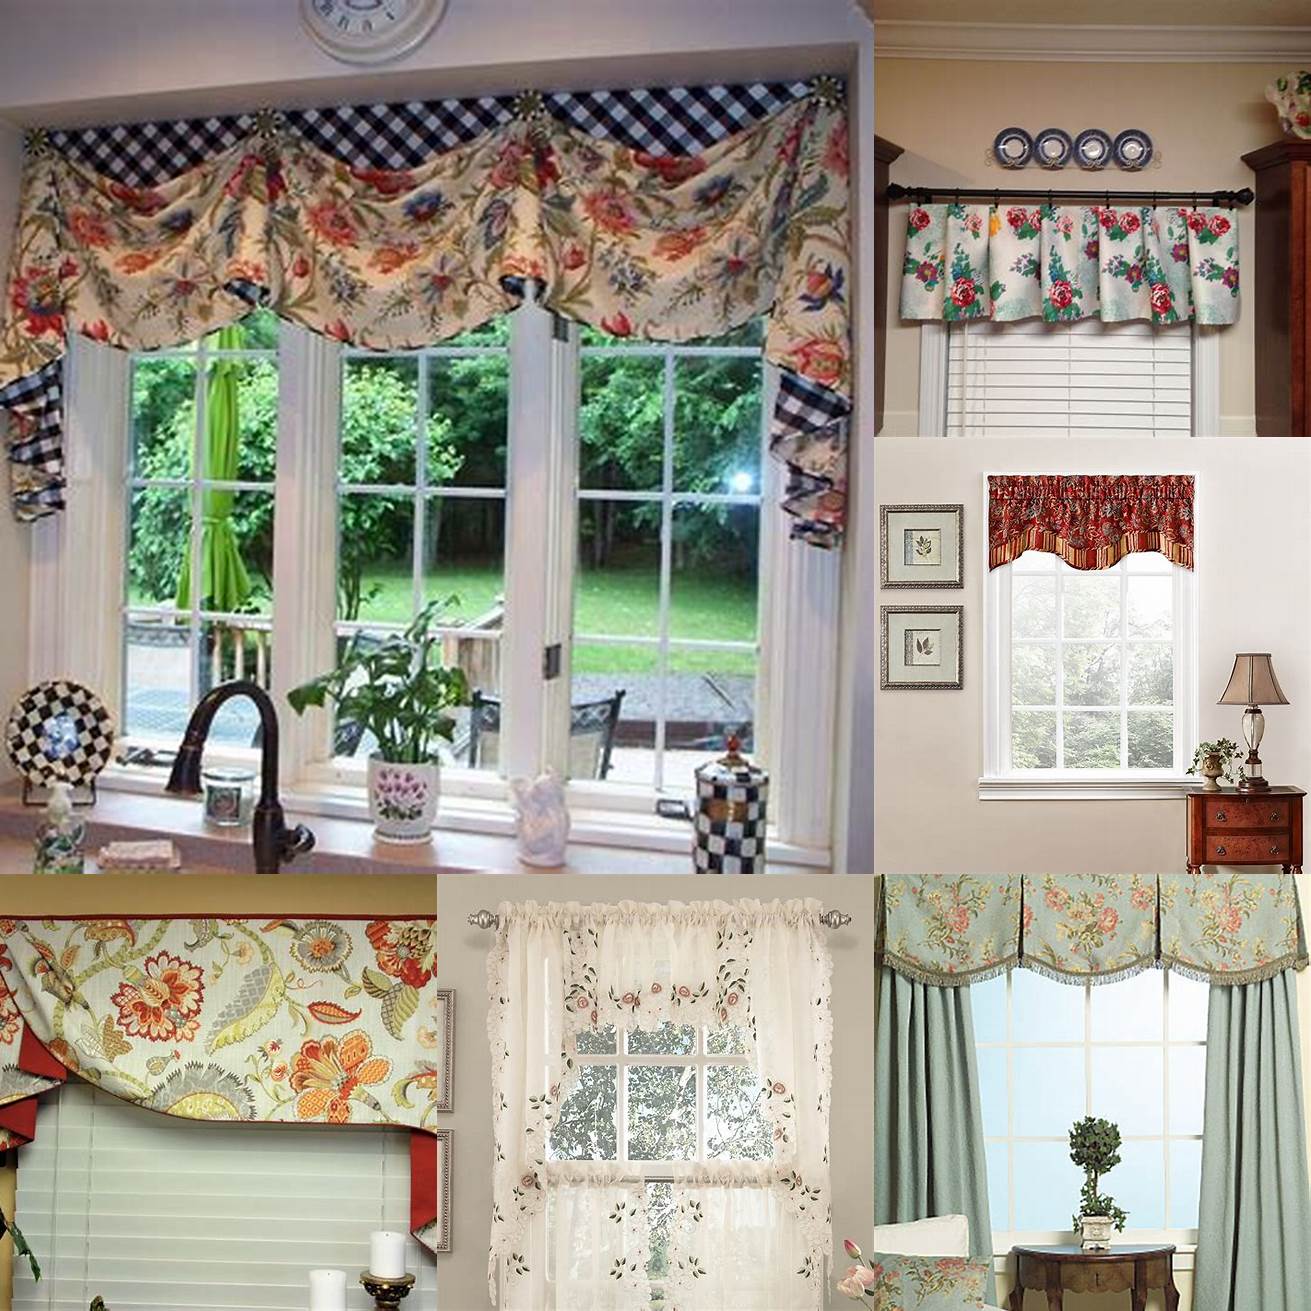 Patterned valance with matching tablecloth